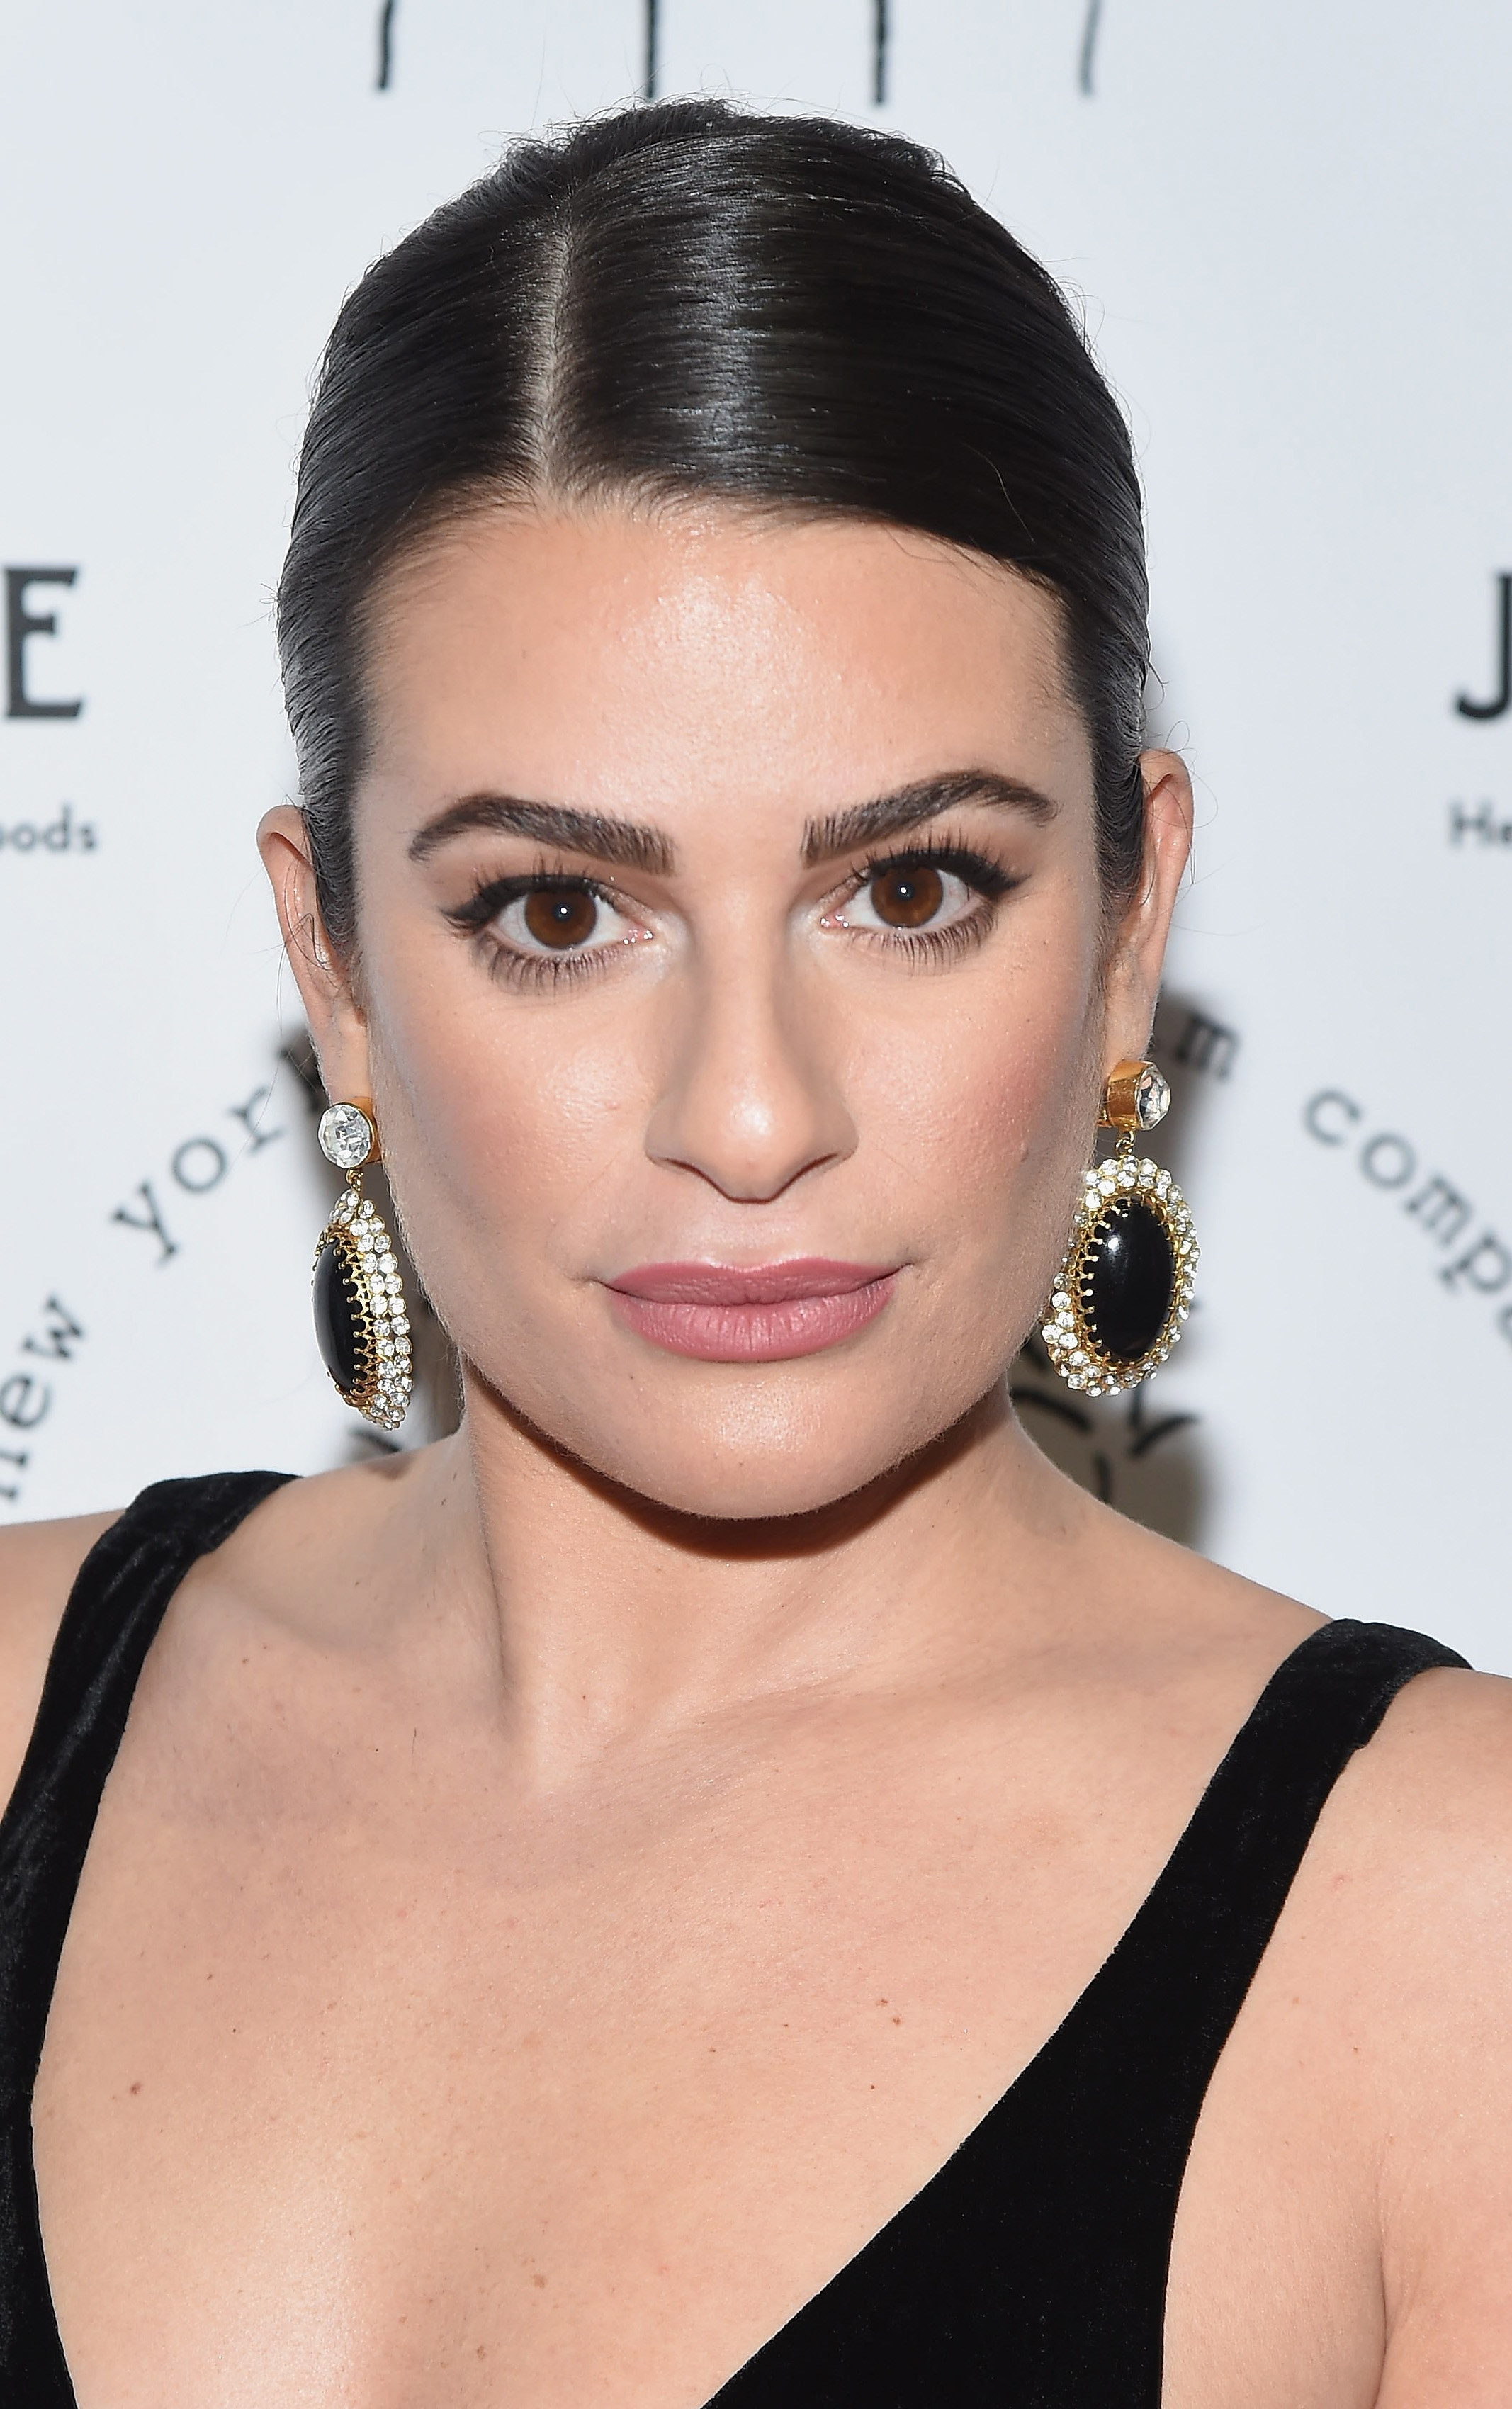 Lea Michele posing with a straight face at an event